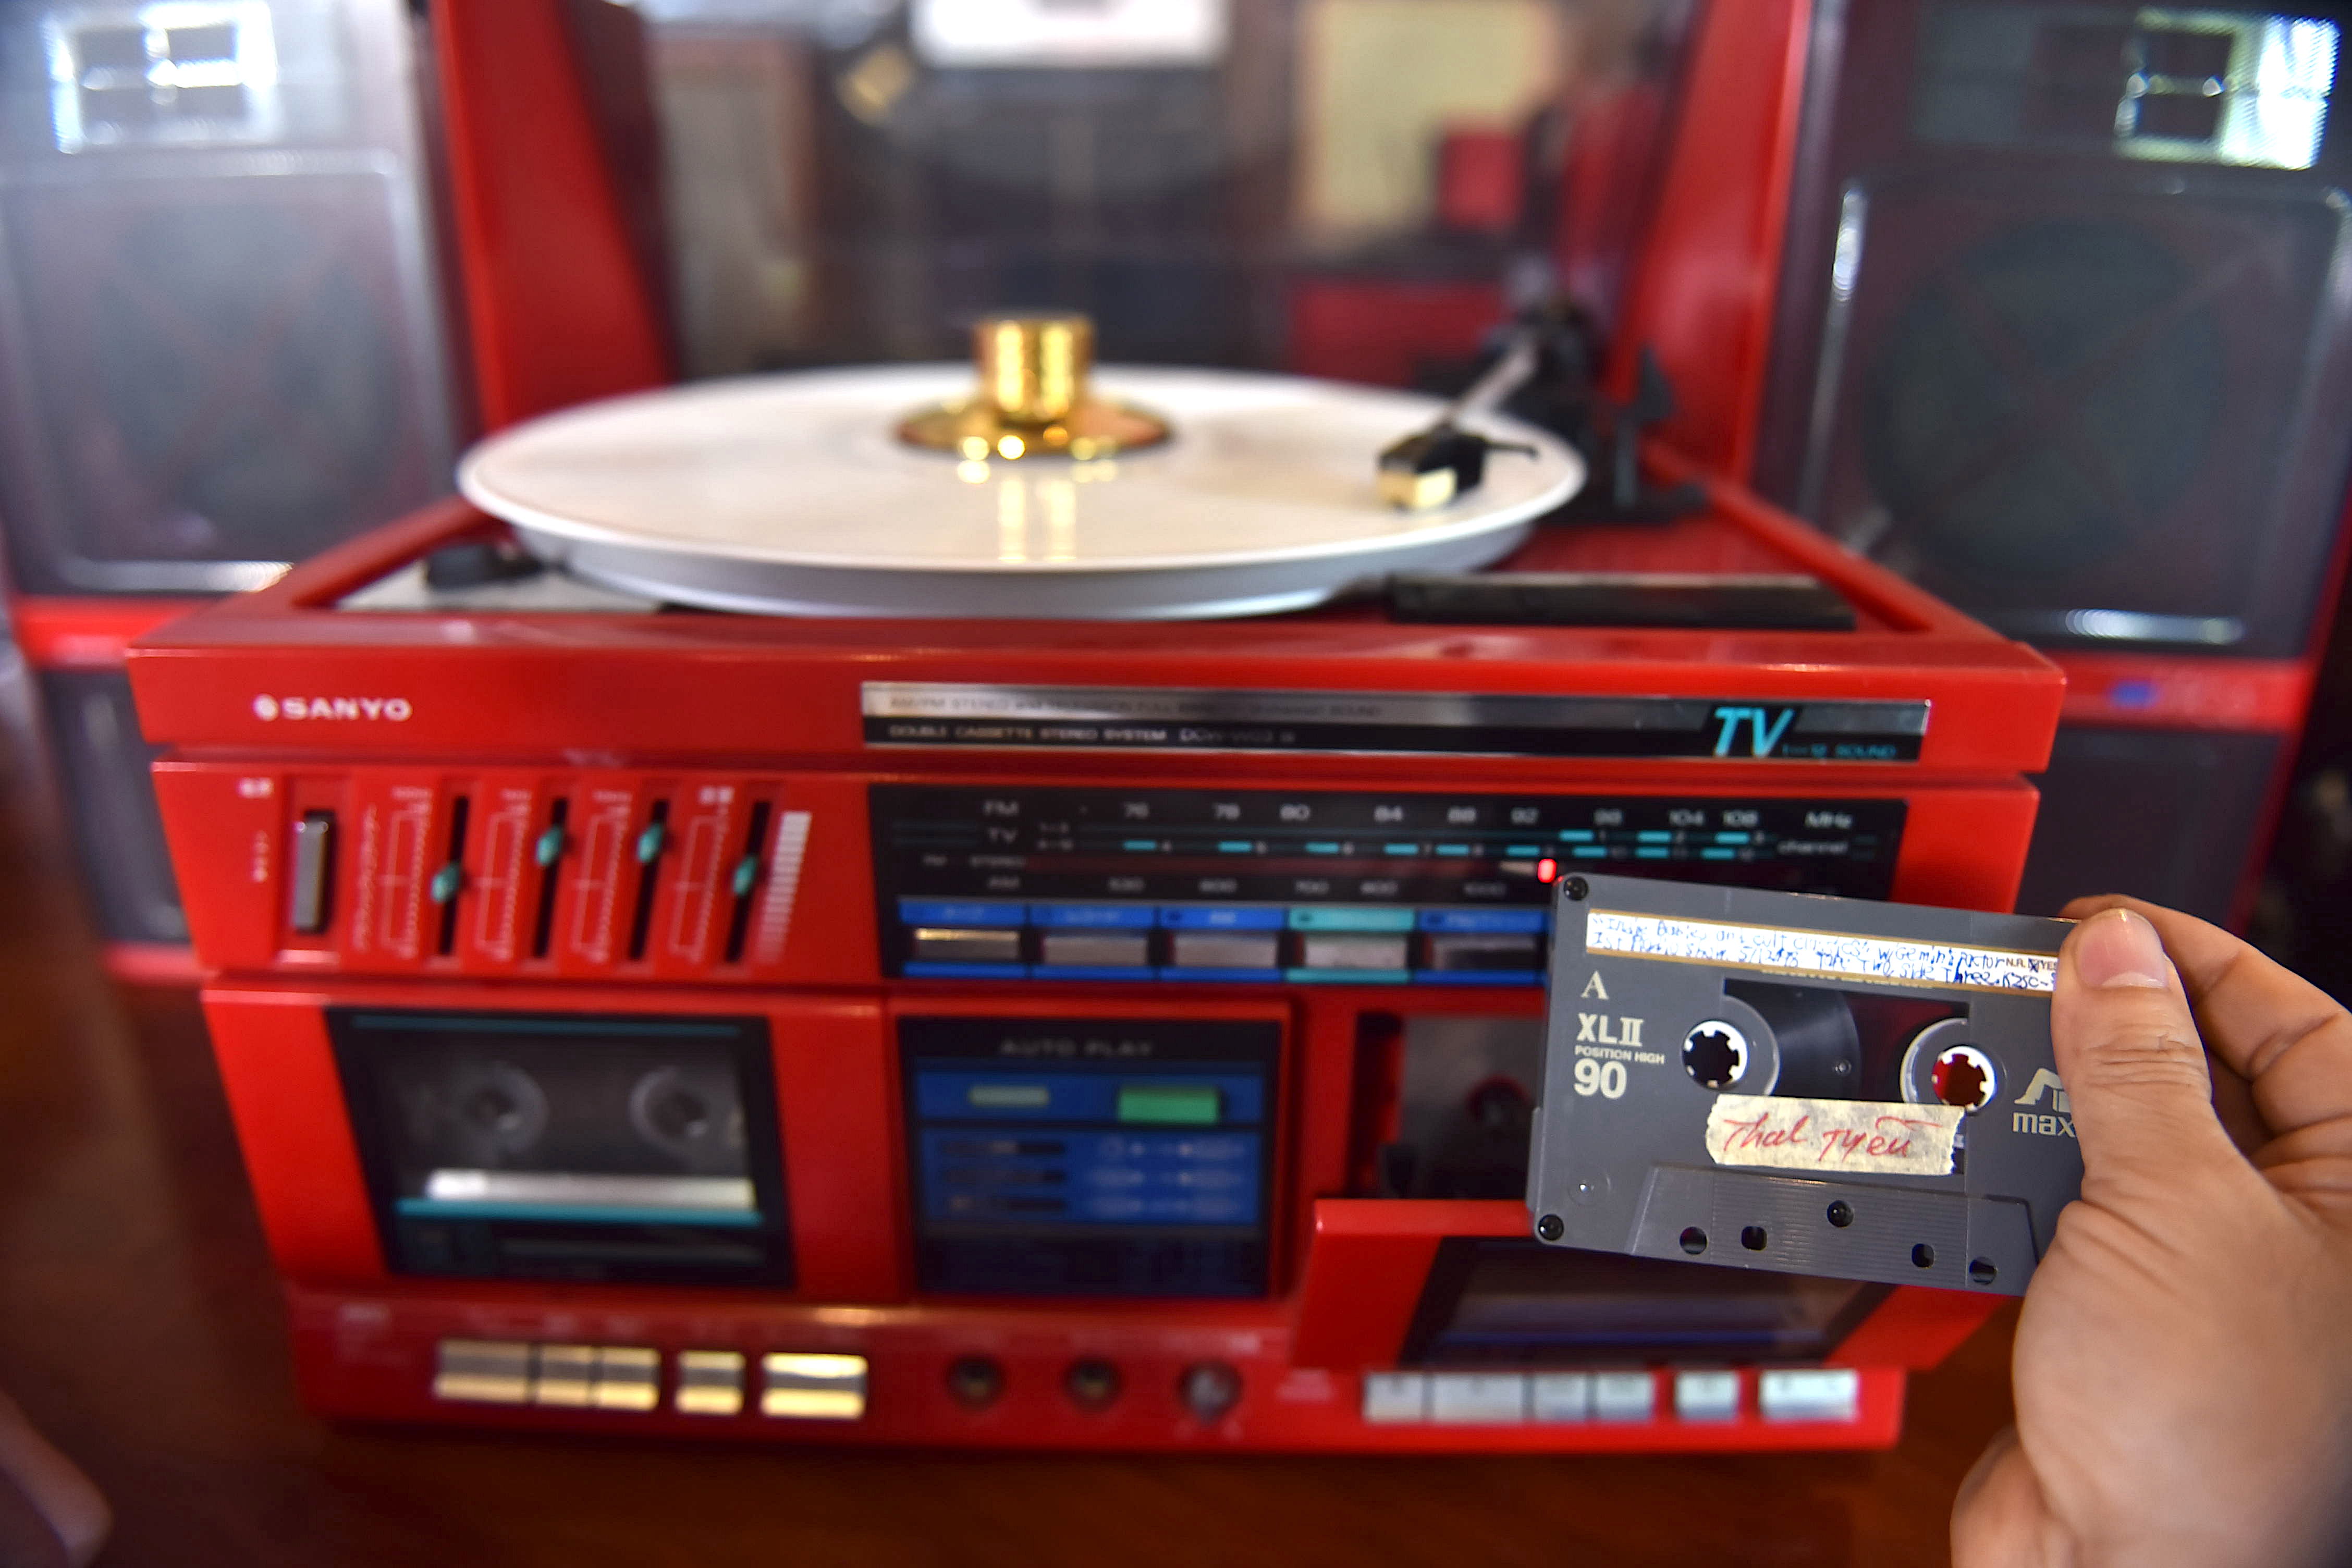 A device combining a turntable with a cassette in Tuan Akai’s collection. Photo: Ngoc Phuong / Tuoi Tre News